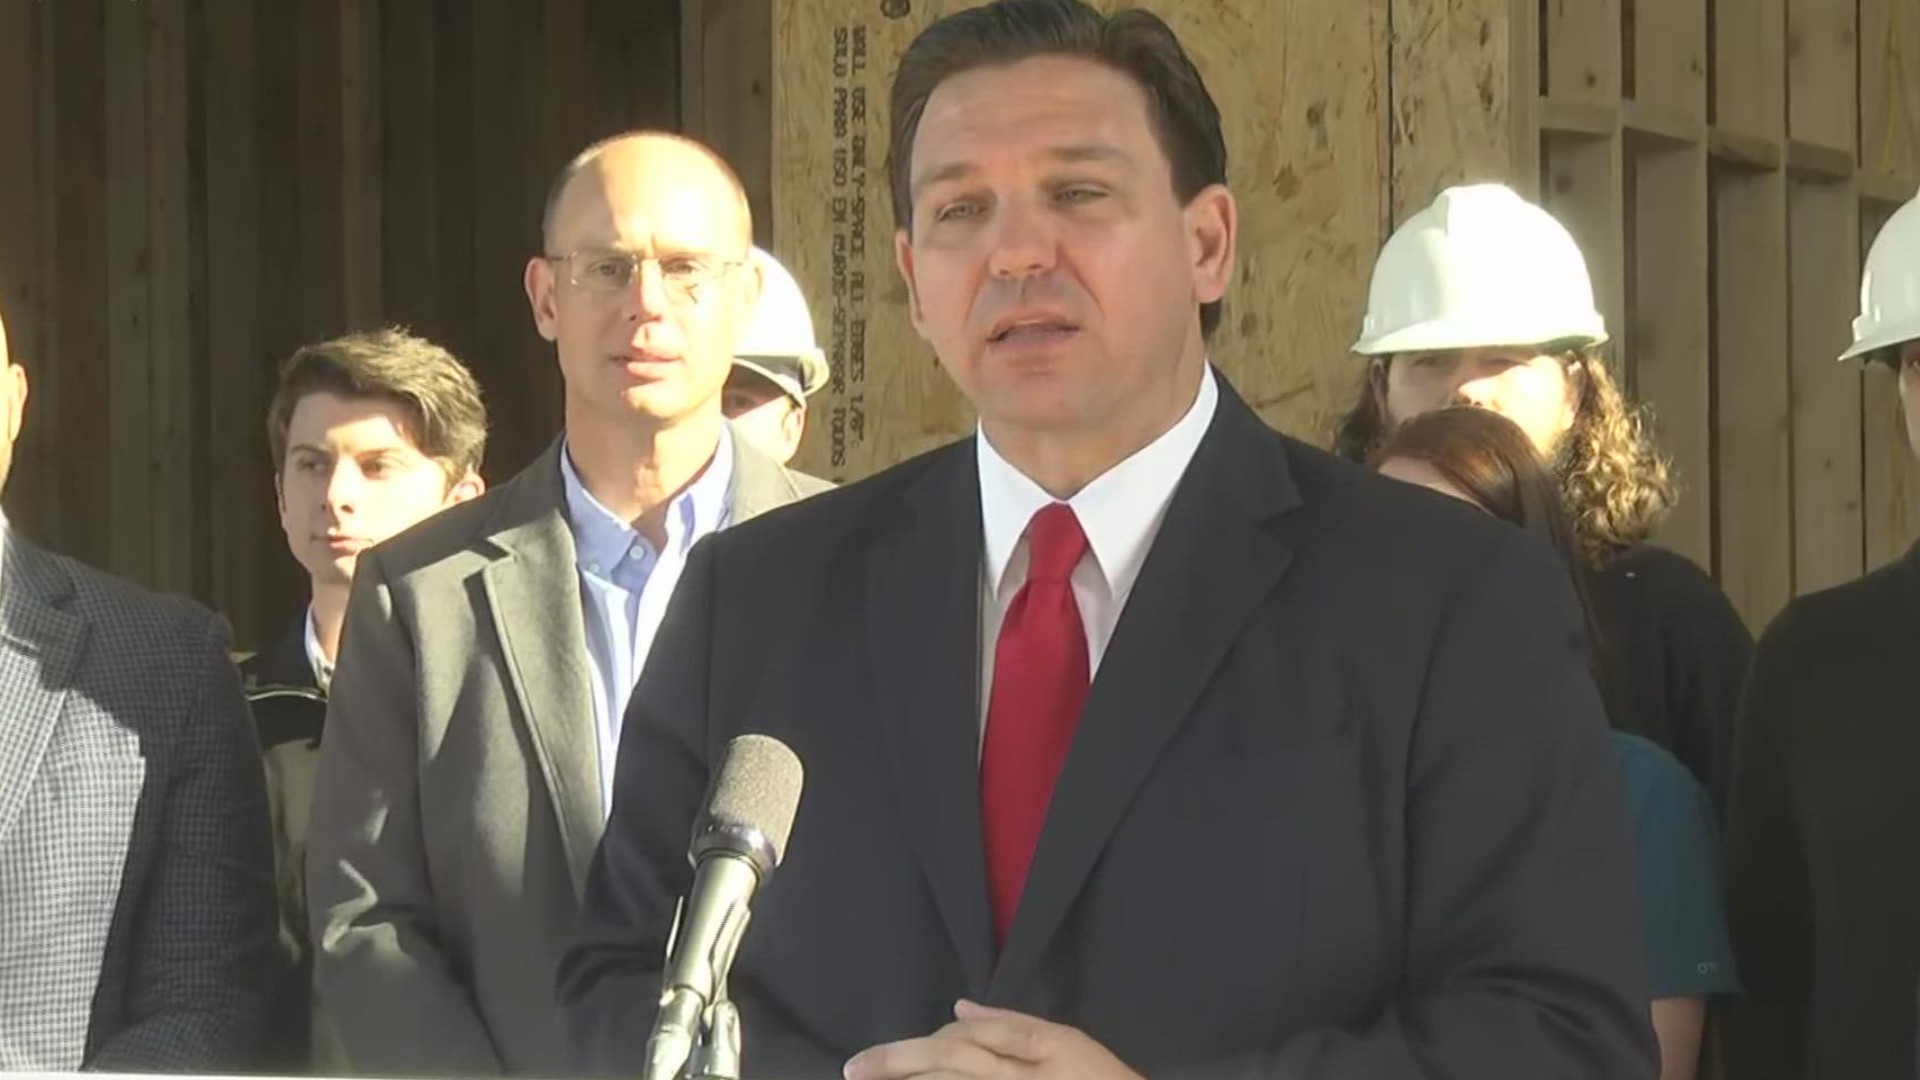 Gov. DeSantis says St. Petersburg College will be included in this endeavor.